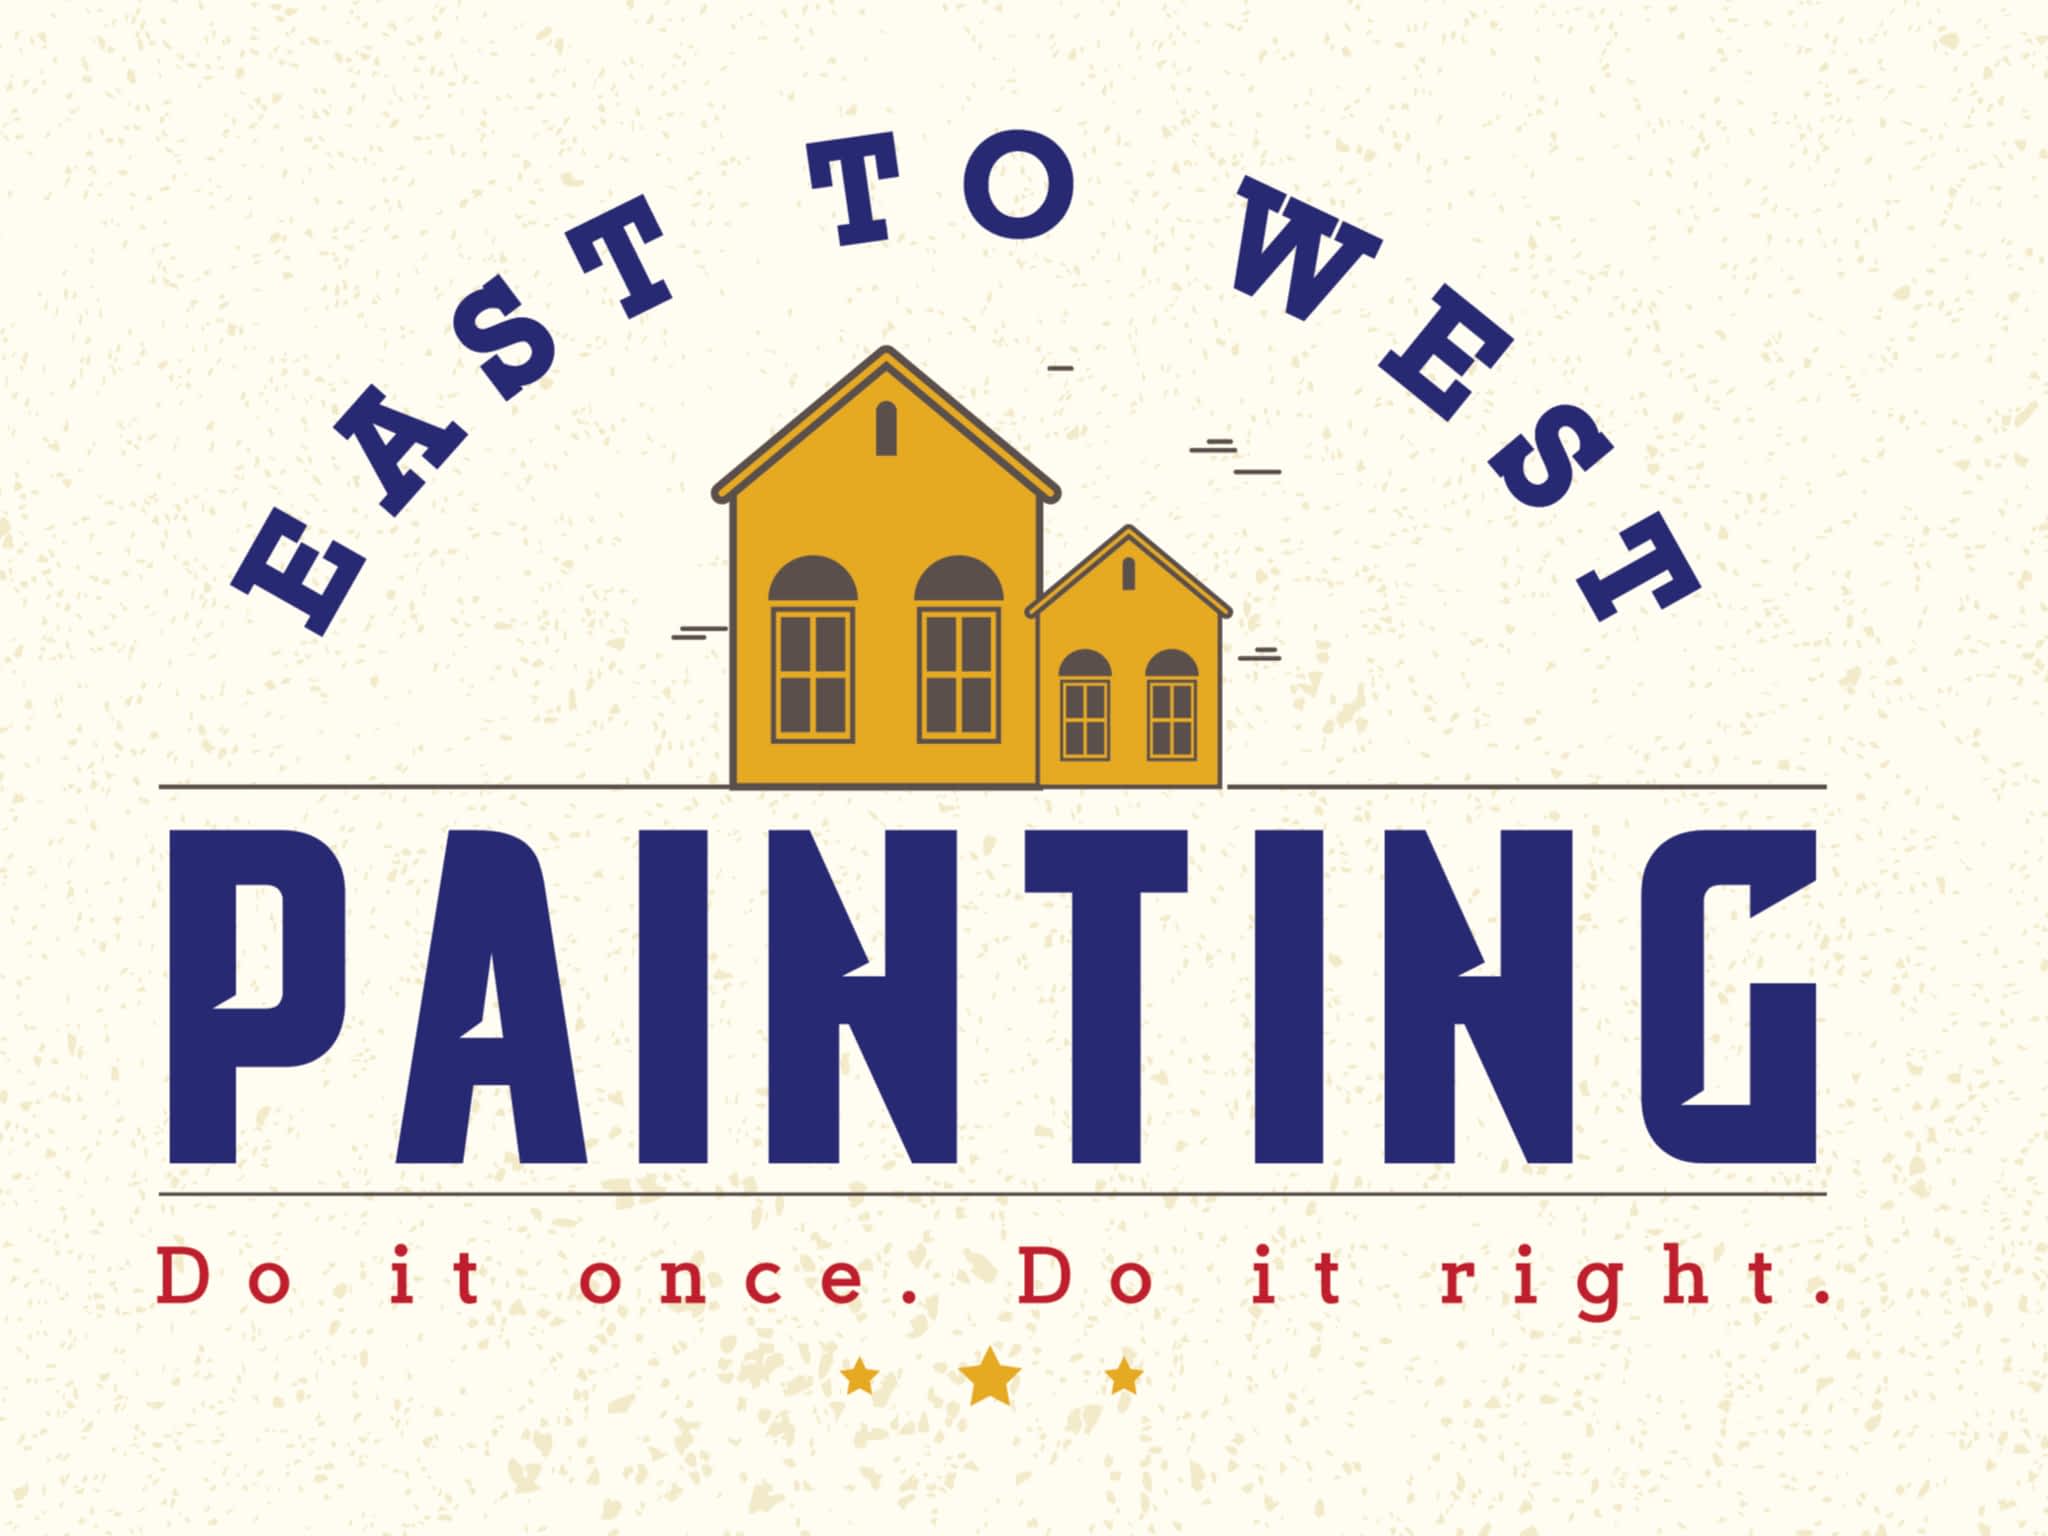 photo East to West Painting